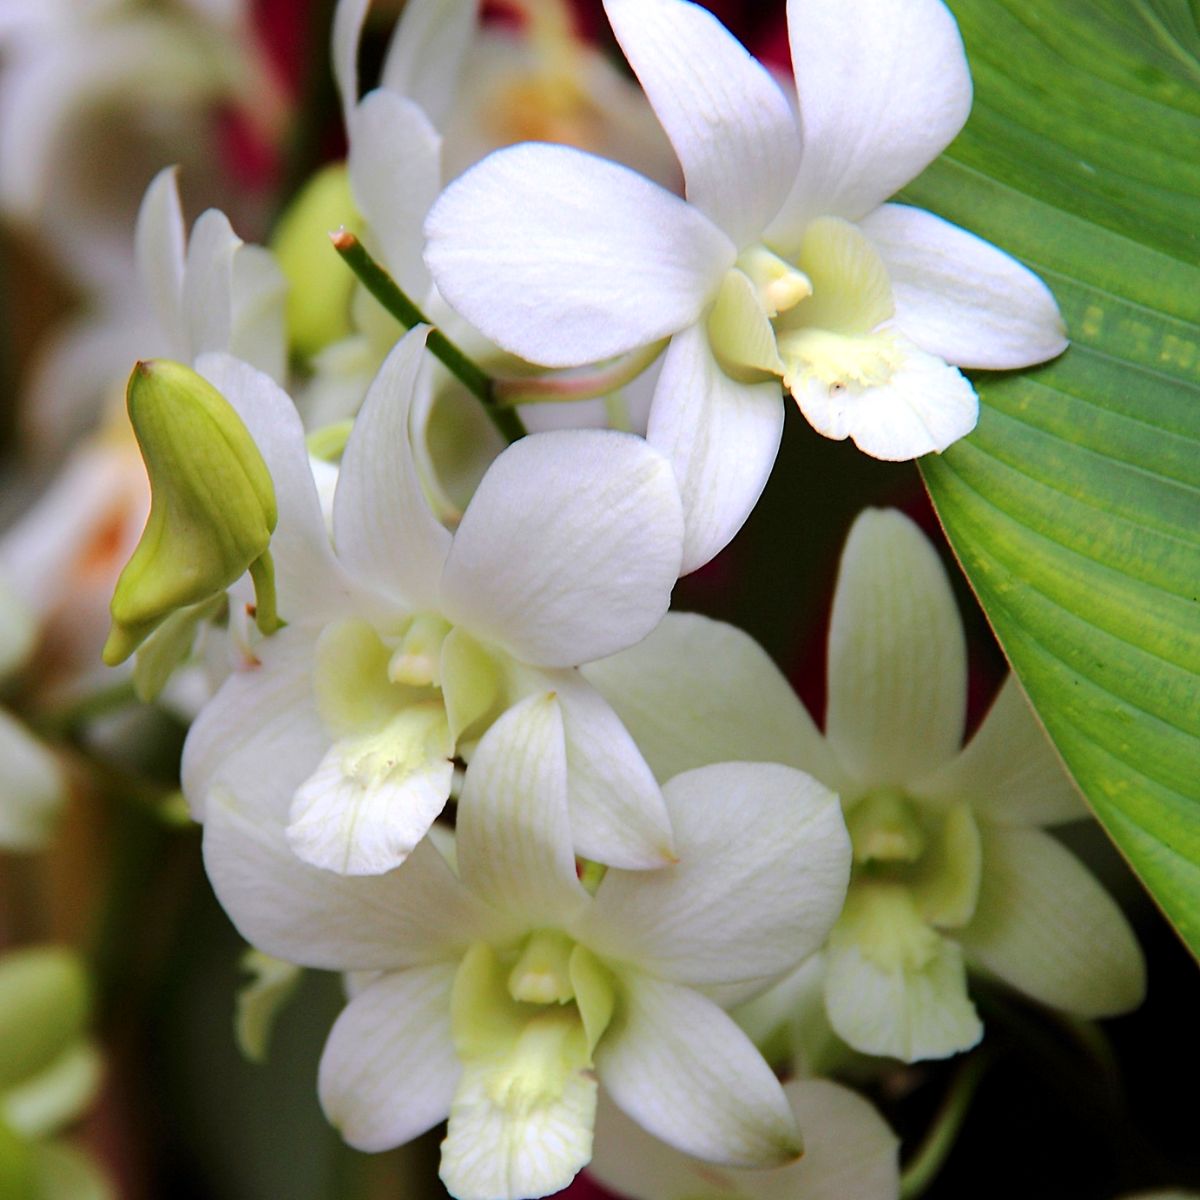 Dendrobium Shavin White Orchid - Pure White Blooms with Graceful Elegance